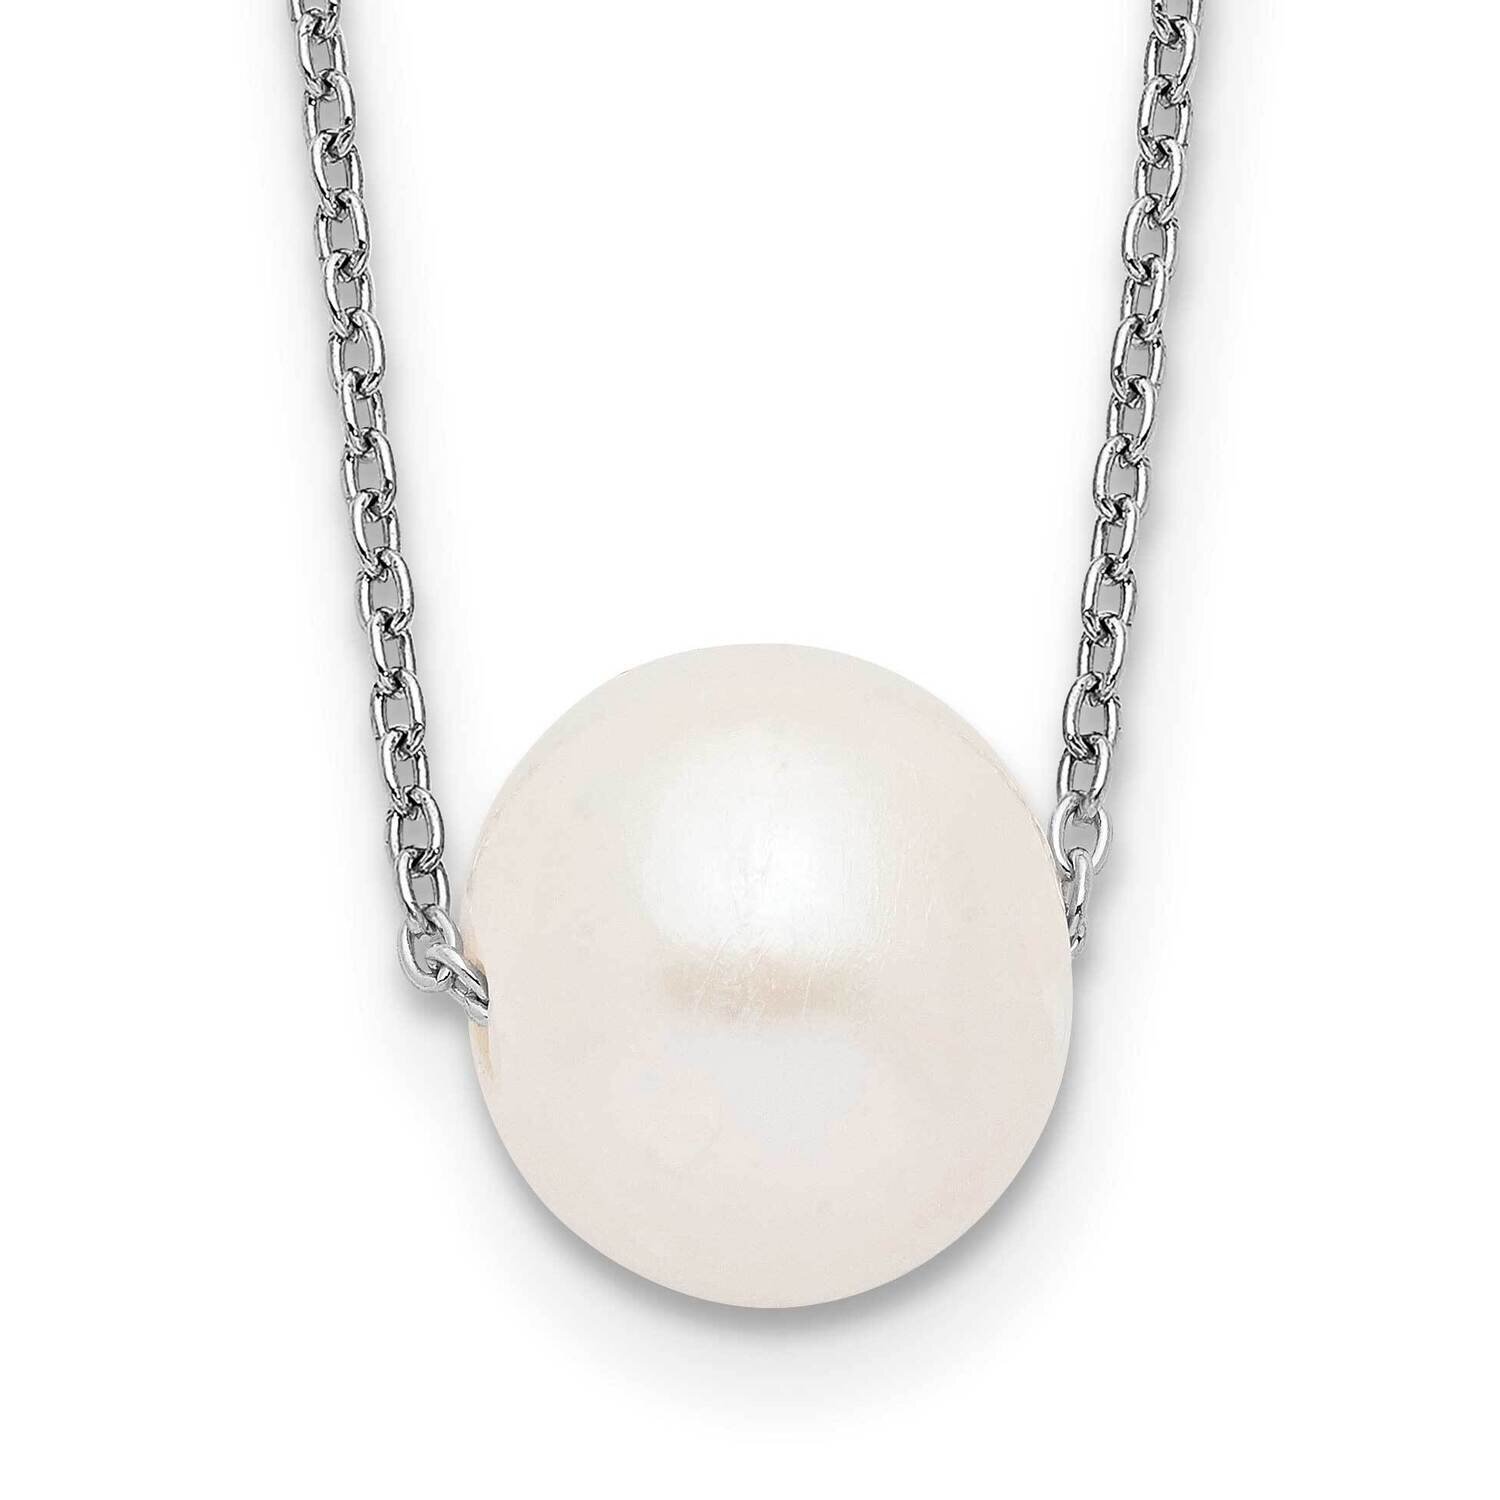 17 Inch 10-11mm White Cultured Freshwater Pearl Necklace Sterling Silver Rhodium-plated QH5449-17